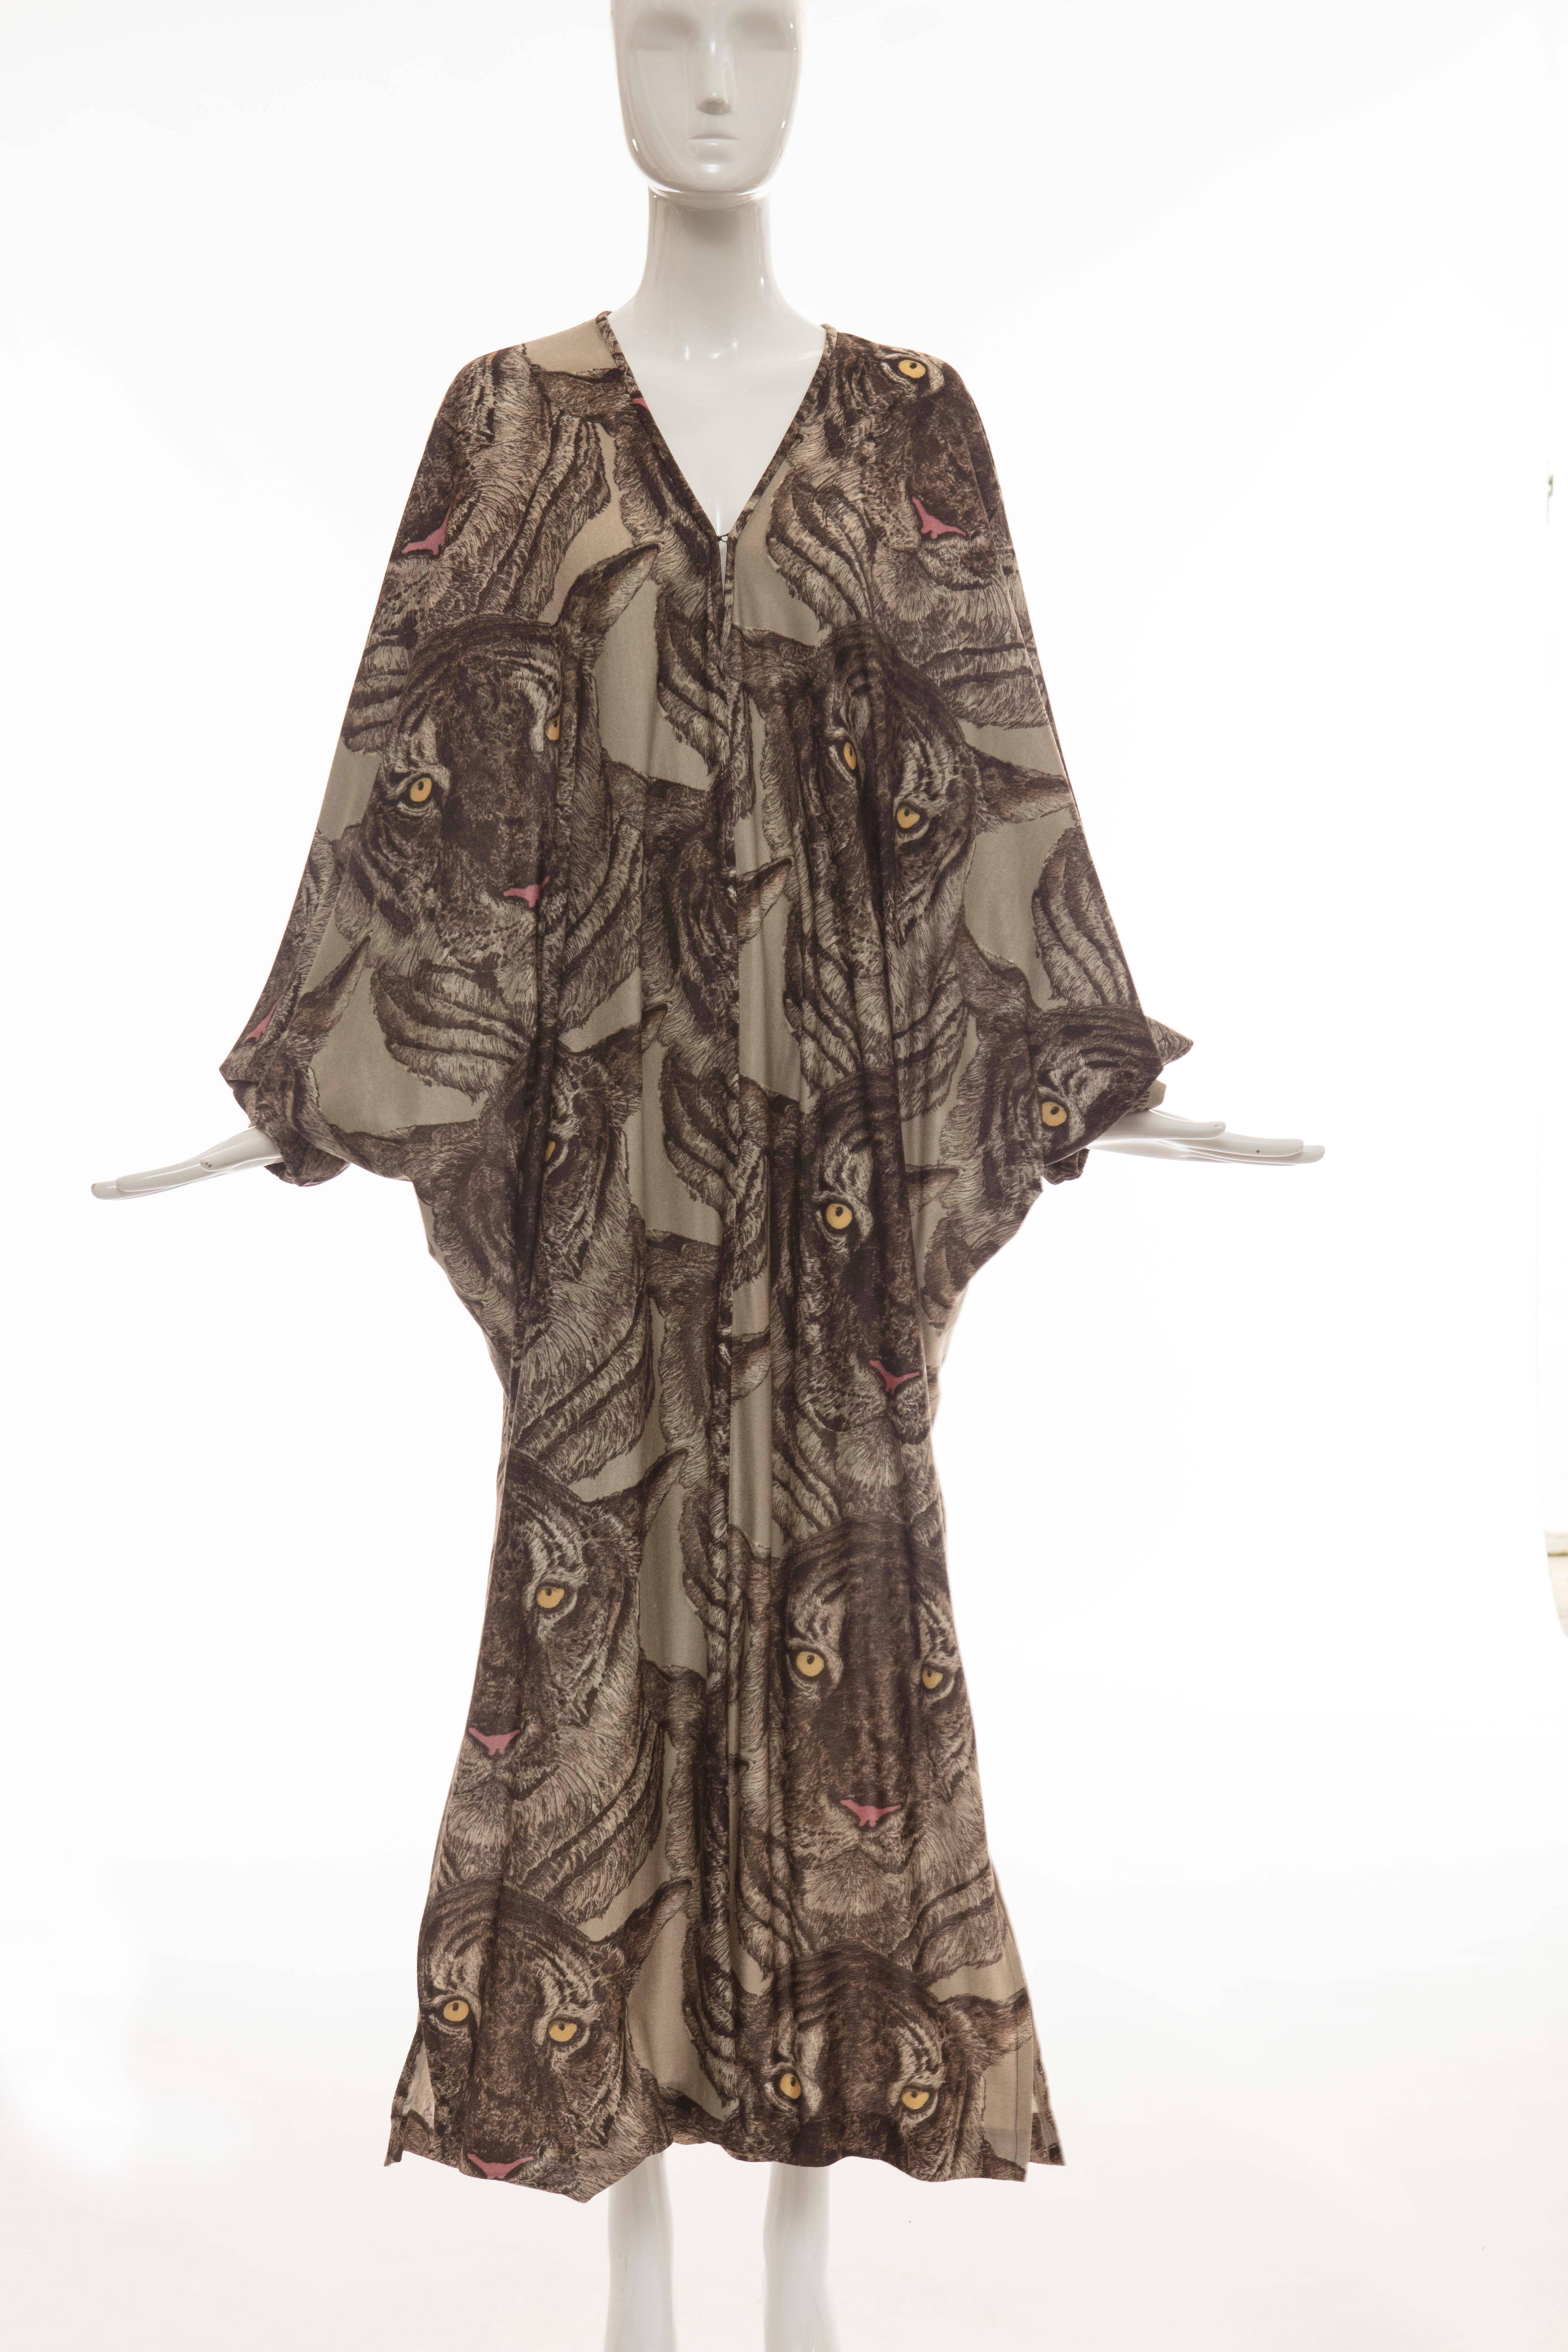 Mr. Blackwell, circa 1980's, tiger-printed kaftan with deep-V front with hook and eye,  and two front side slits.

Length: 55.5